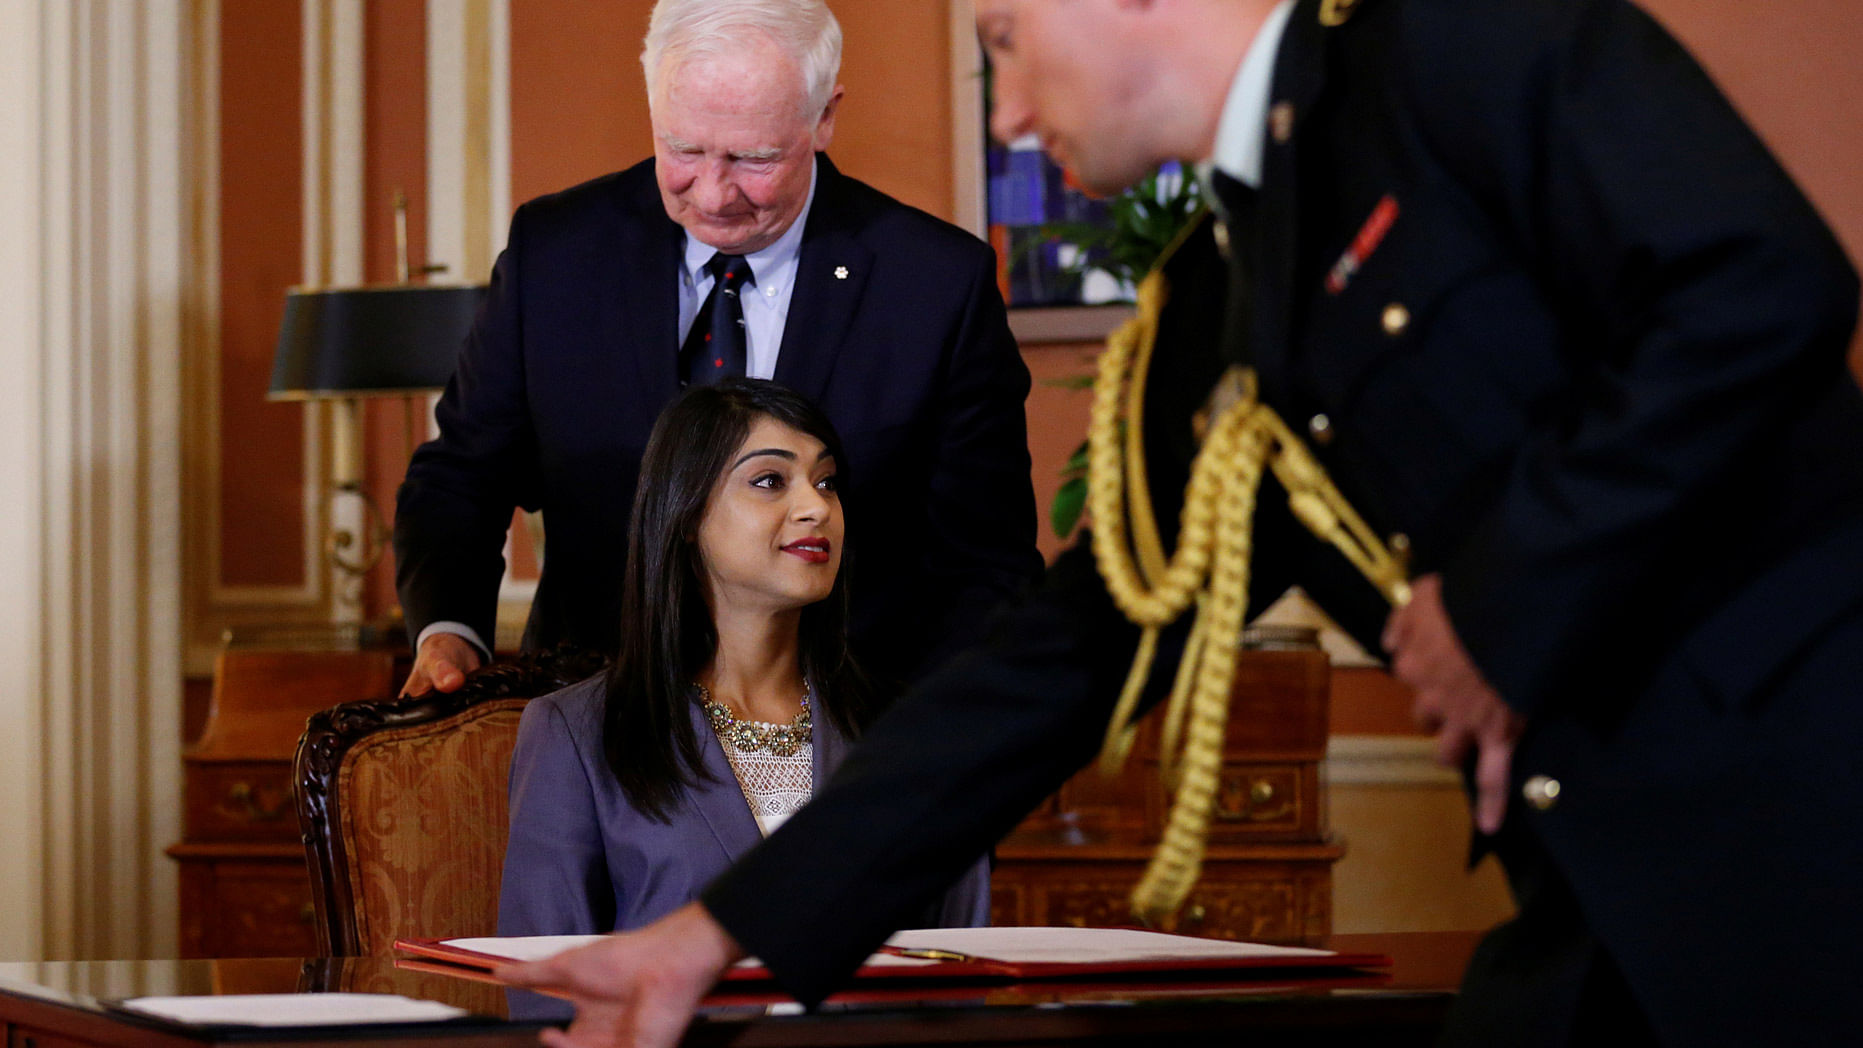 

Bardish Chagger was the first Indo-Canadian woman to be inducted into the cabinet last year. (Photo: Reuters)